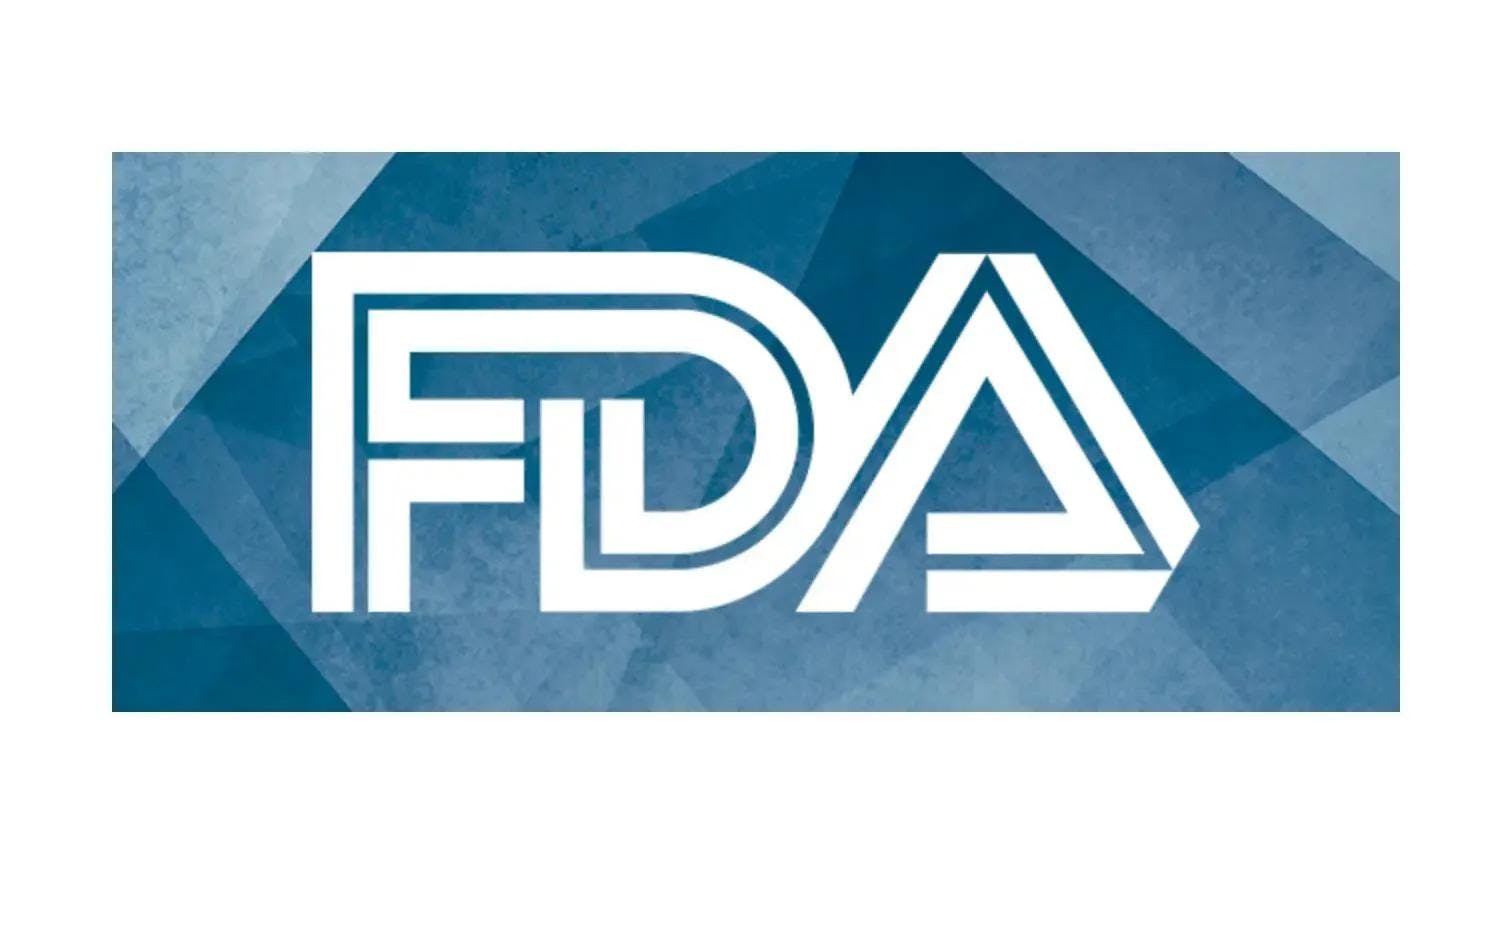 FDA Approves Pirtobrutinib For Treatment of Adult Patients With CLL, SLL